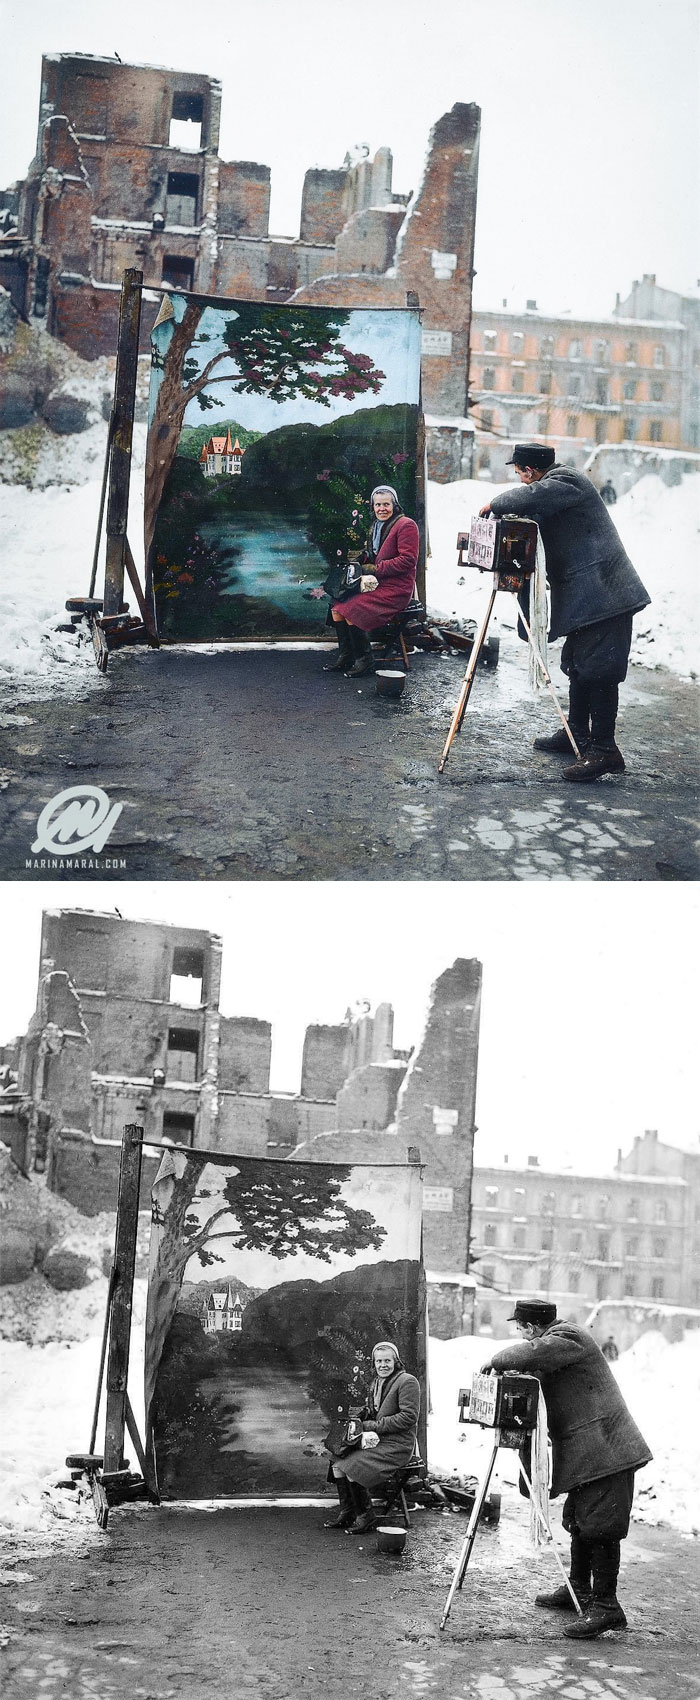 A Photographer Uses His Own Backdrop To Mask Poland's World War II Ruins While Shooting A Portrait In Warsaw In November 1946